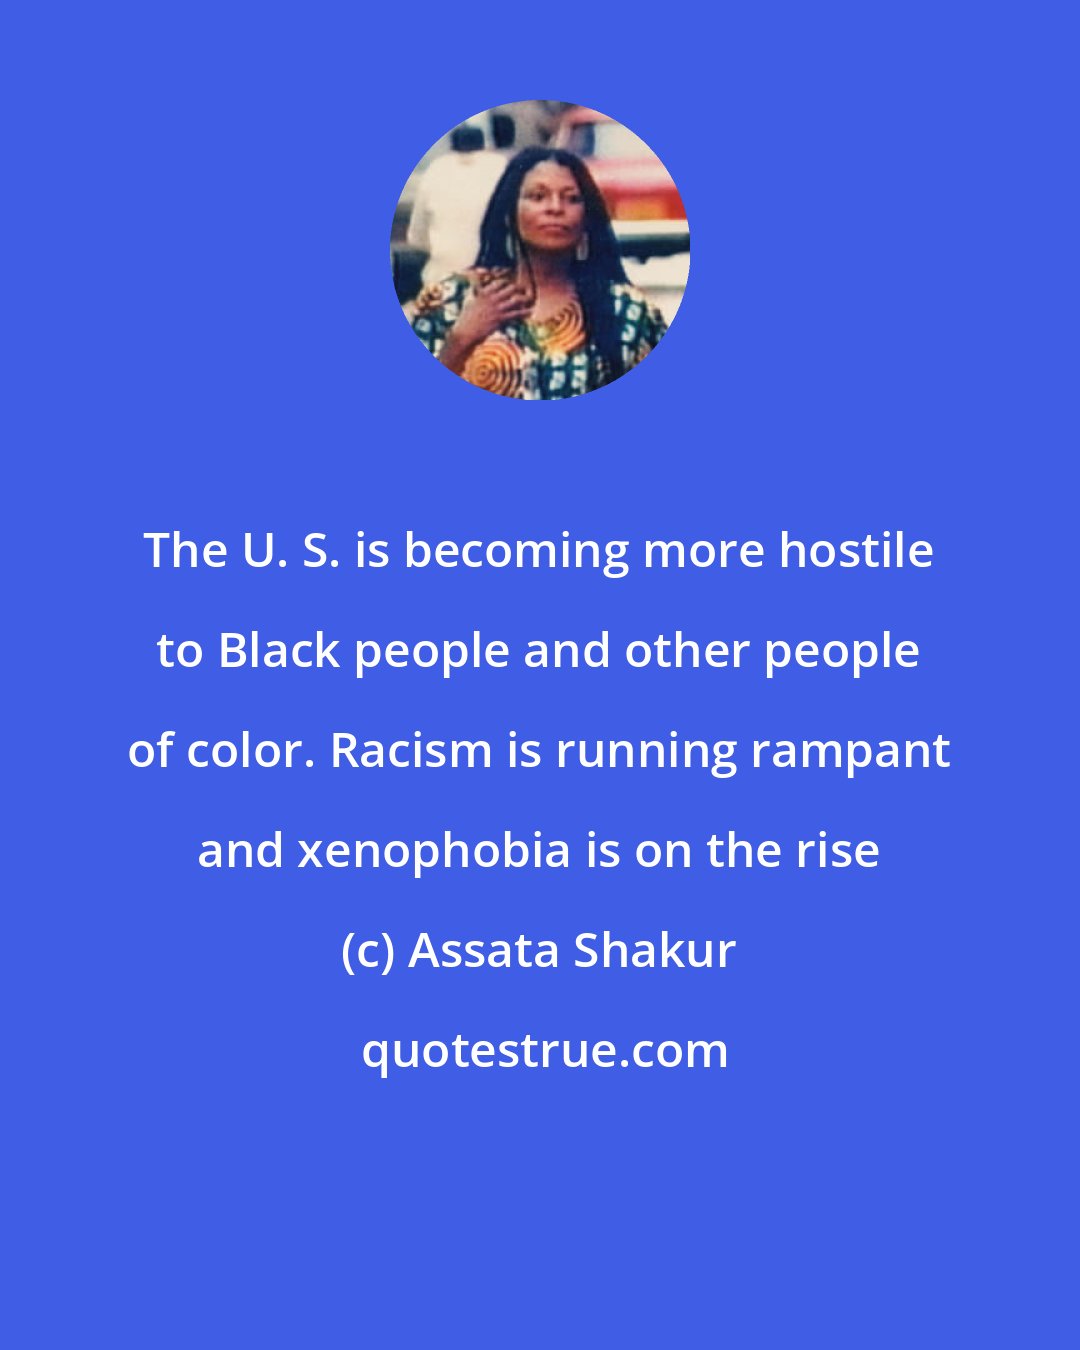 Assata Shakur: The U. S. is becoming more hostile to Black people and other people of color. Racism is running rampant and xenophobia is on the rise